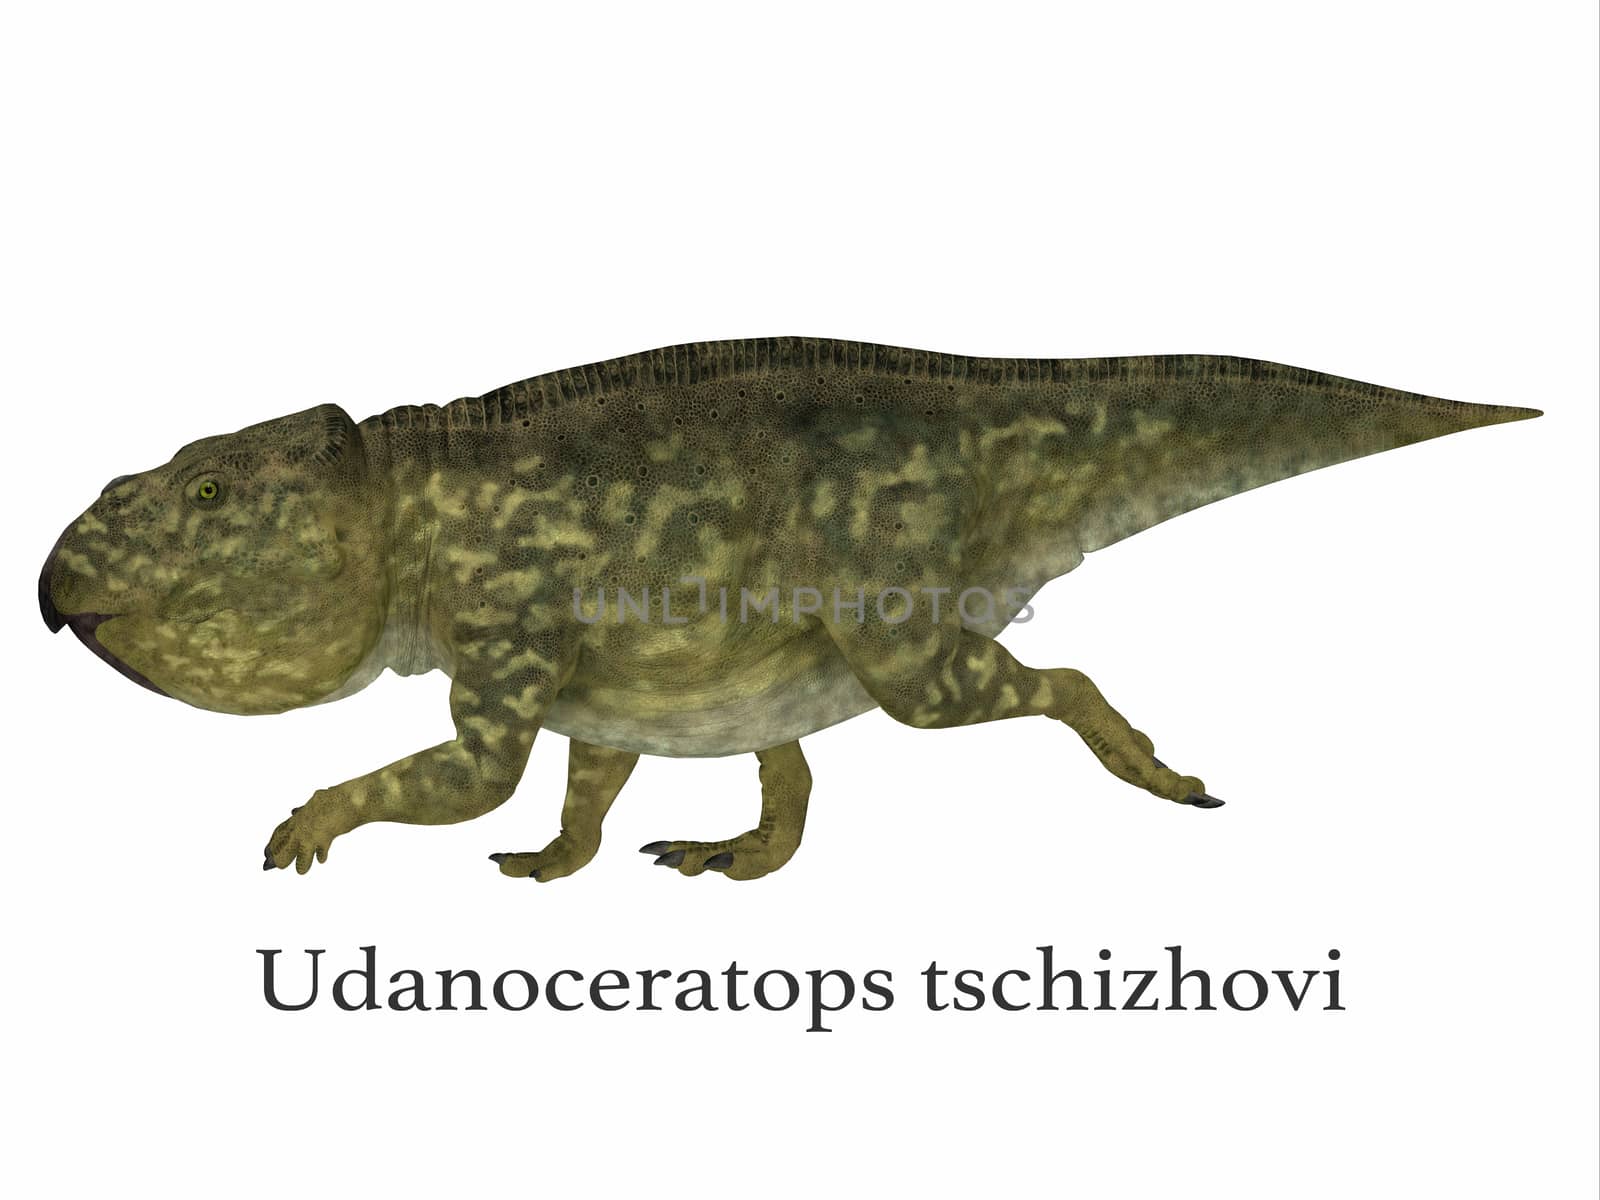 Udanoceratops was a Ceratopsian herbivorous dinosaur that lived in Mongolia in the Cretaceous Period.